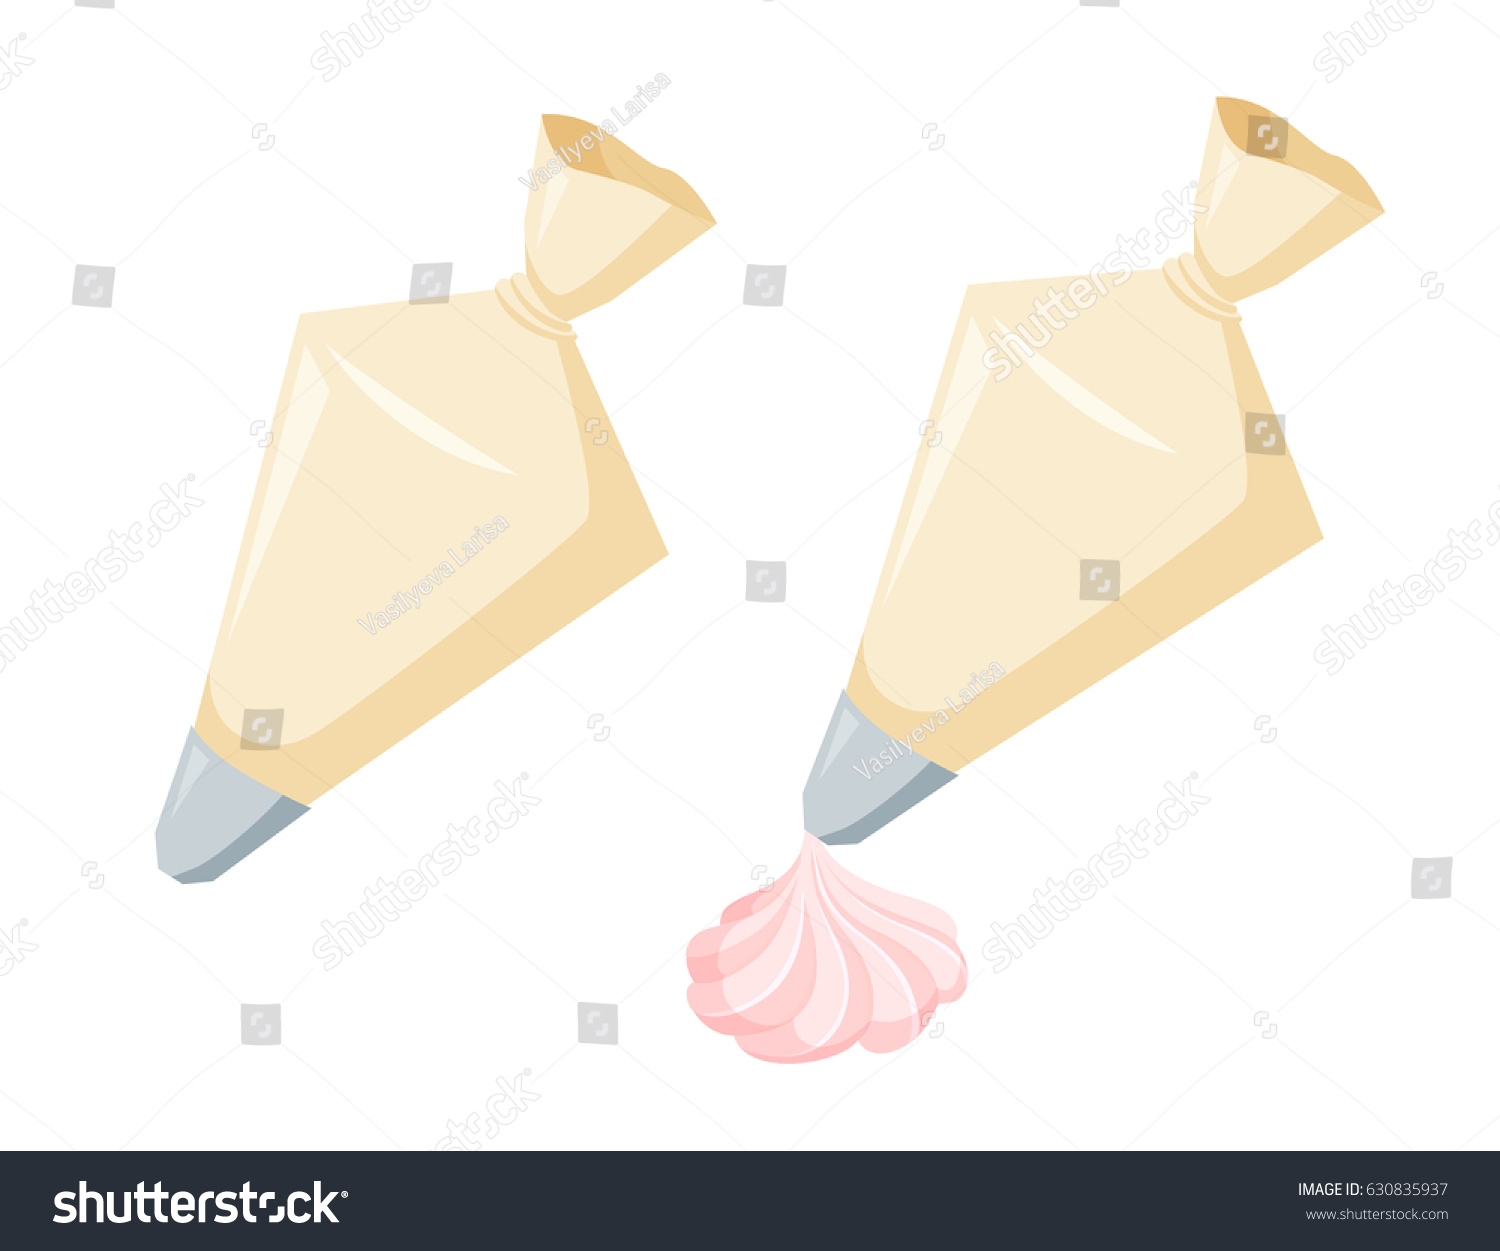 SVG of Pastry bag for decorate cakes with cream. Cooking and bakery process vector illustration. Kitchenware and utensils isolated on white. Tasty food svg